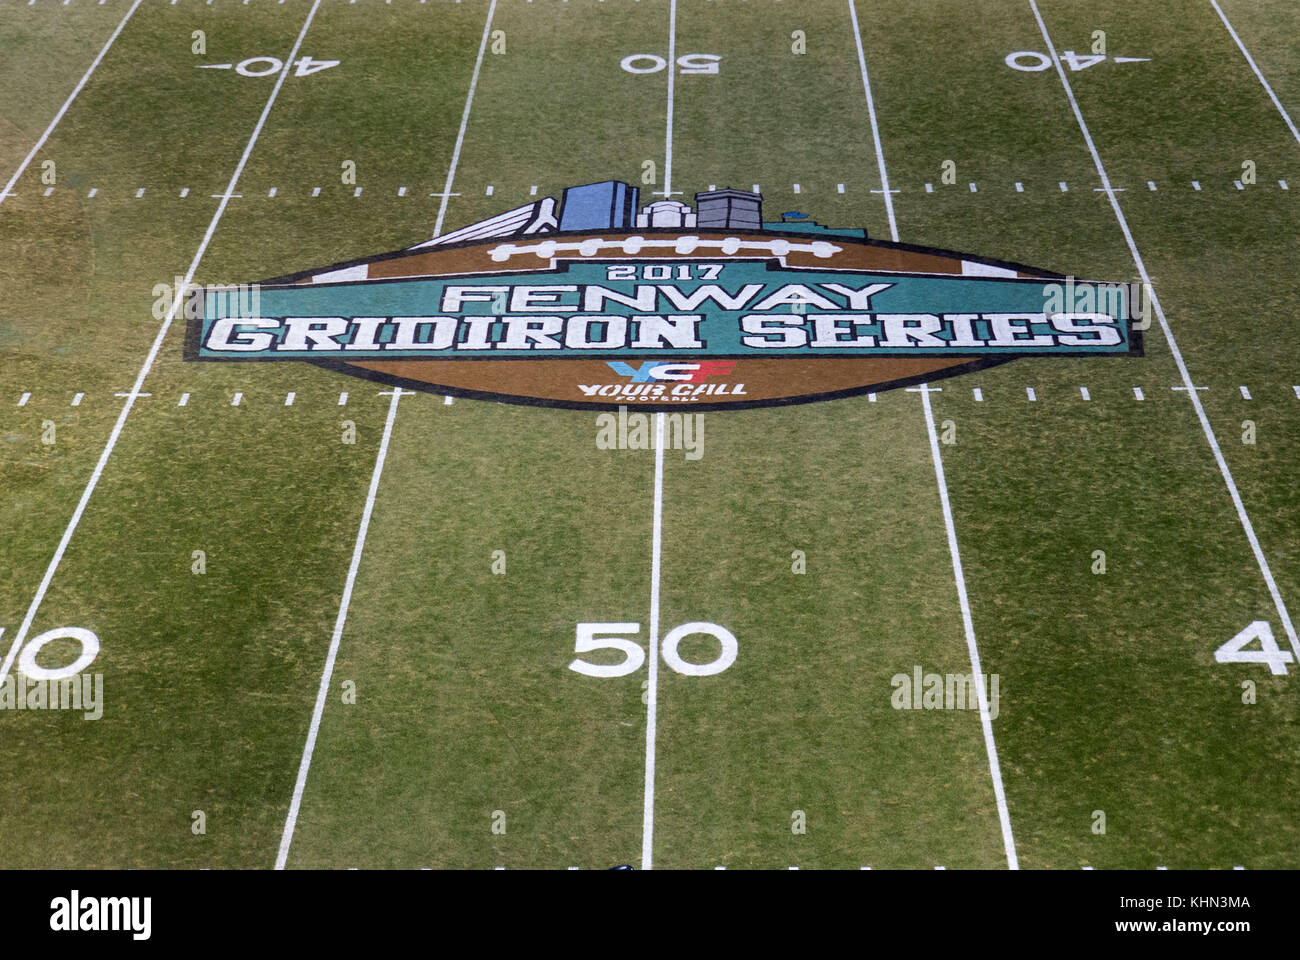 Fenway Park. 18th Nov, 2017. MA, USA; A general view of the serios logo prior to the NCAA football game between Boston College Eagles and UConn Huskies at Fenway Park. Boston College defeated UConn 39-16. Anthony Nesmith/CSM/Alamy Live News Stock Photo